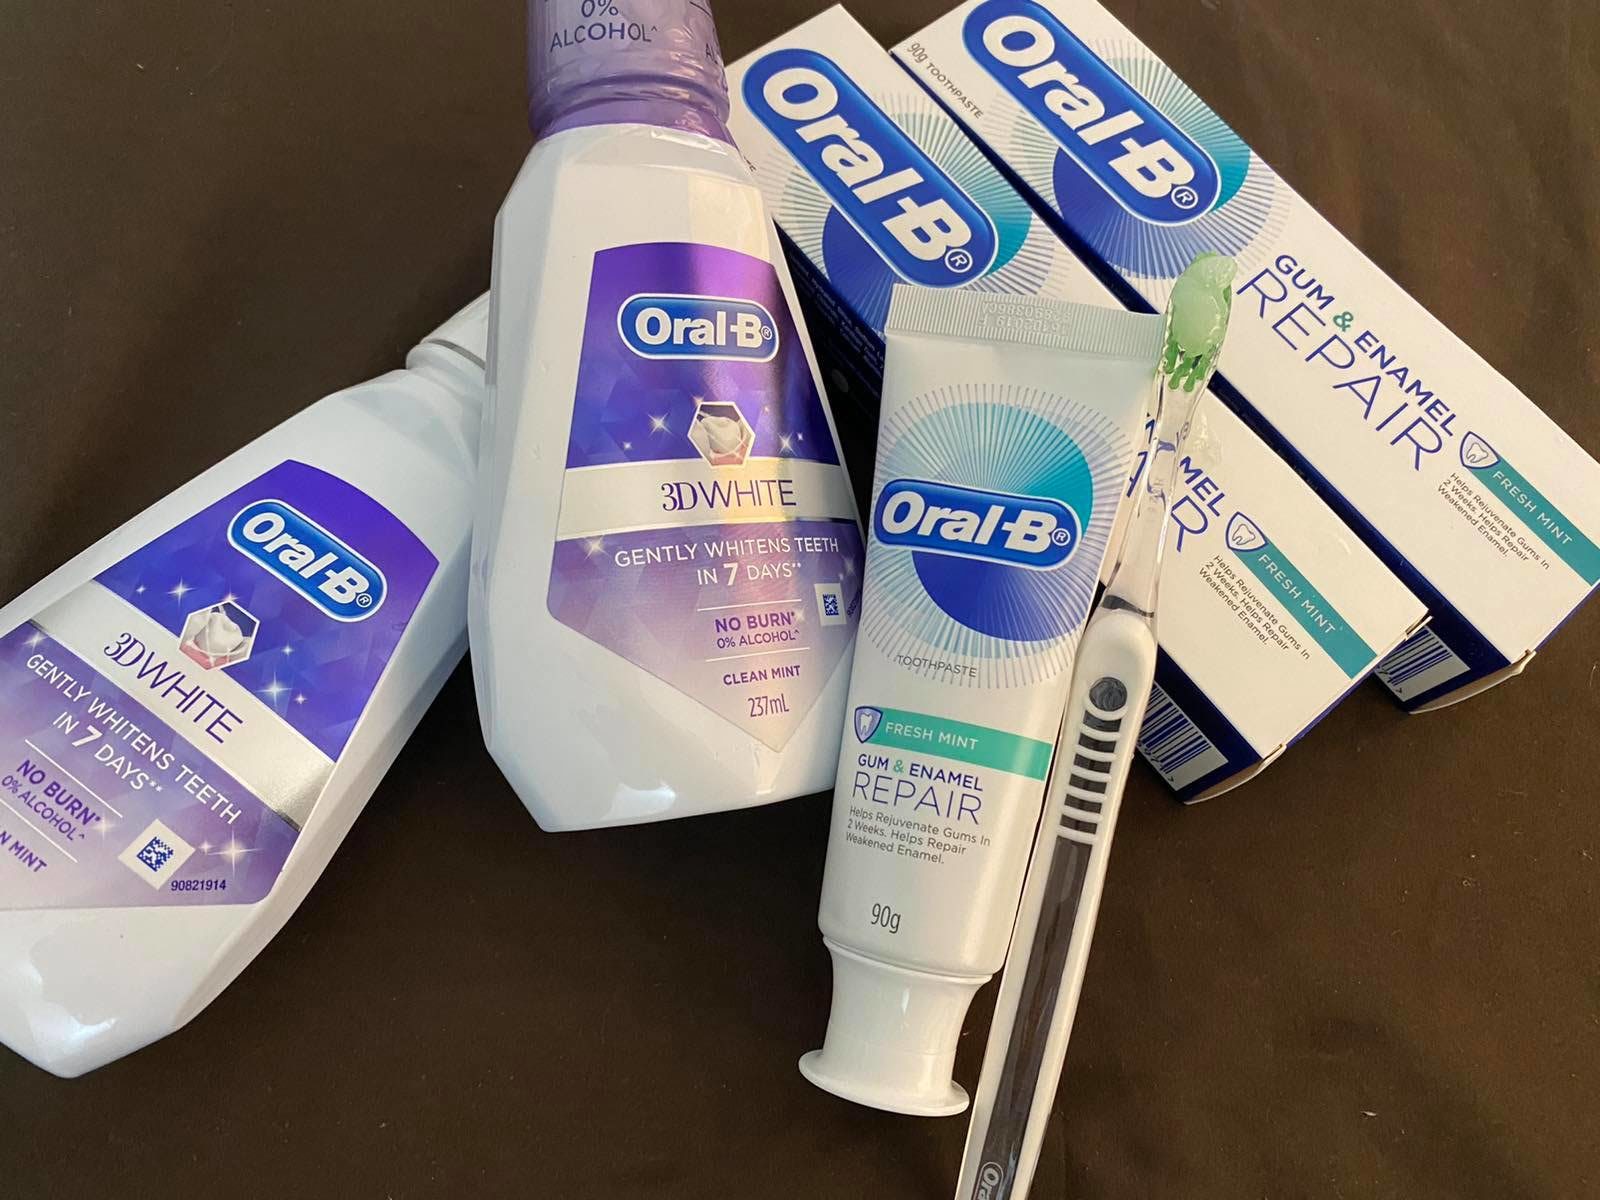 Oral B 1 rotated